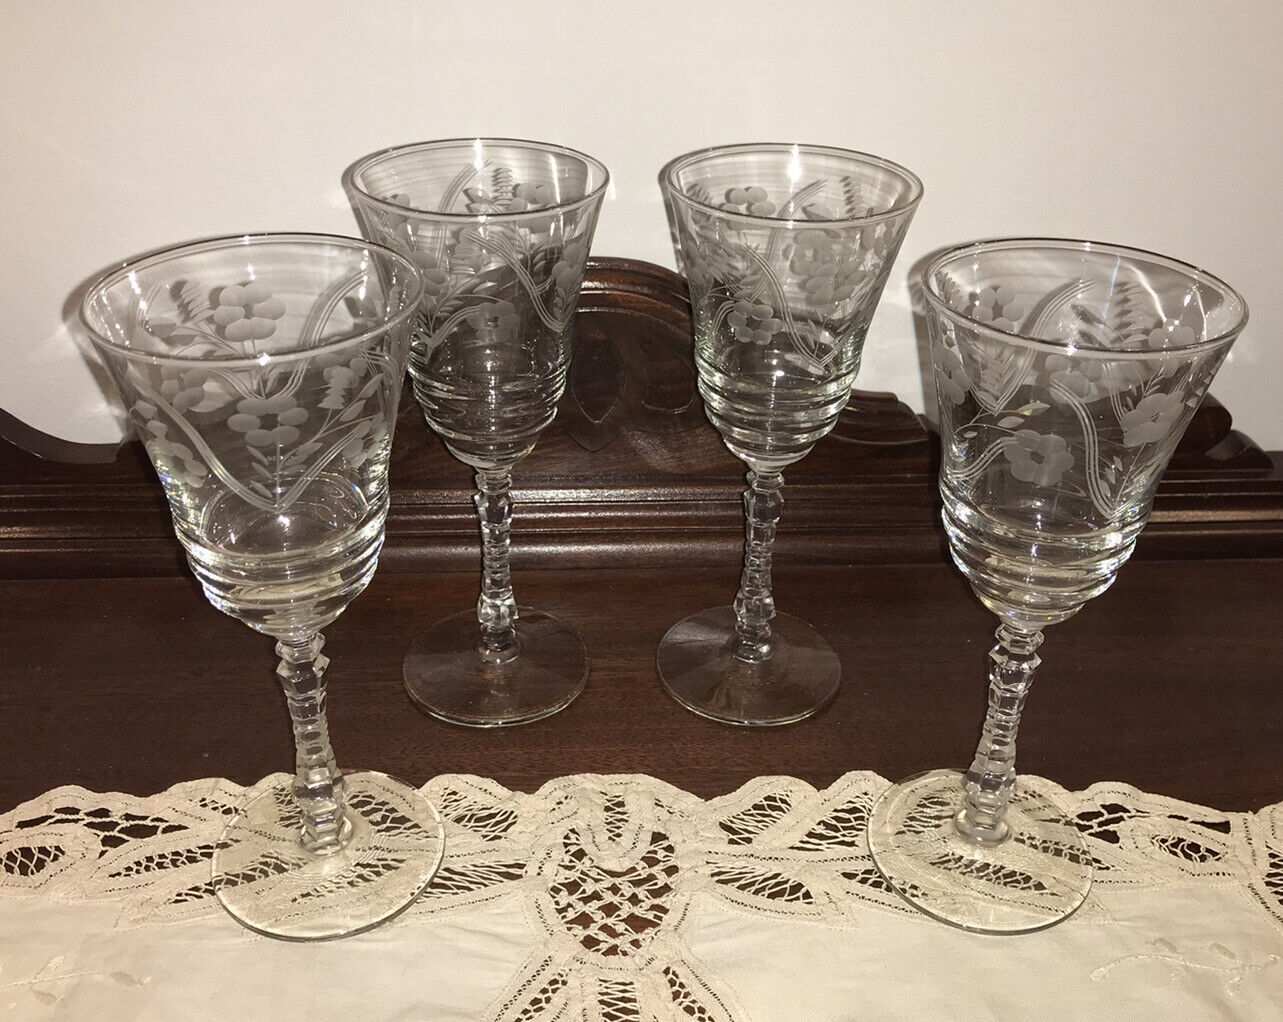 LIBBEY ROCK SHARPE VTG  MID CENTURY WINE GLASS LOT OF 4 ETCHED FLORAL 7-3/4” EUC